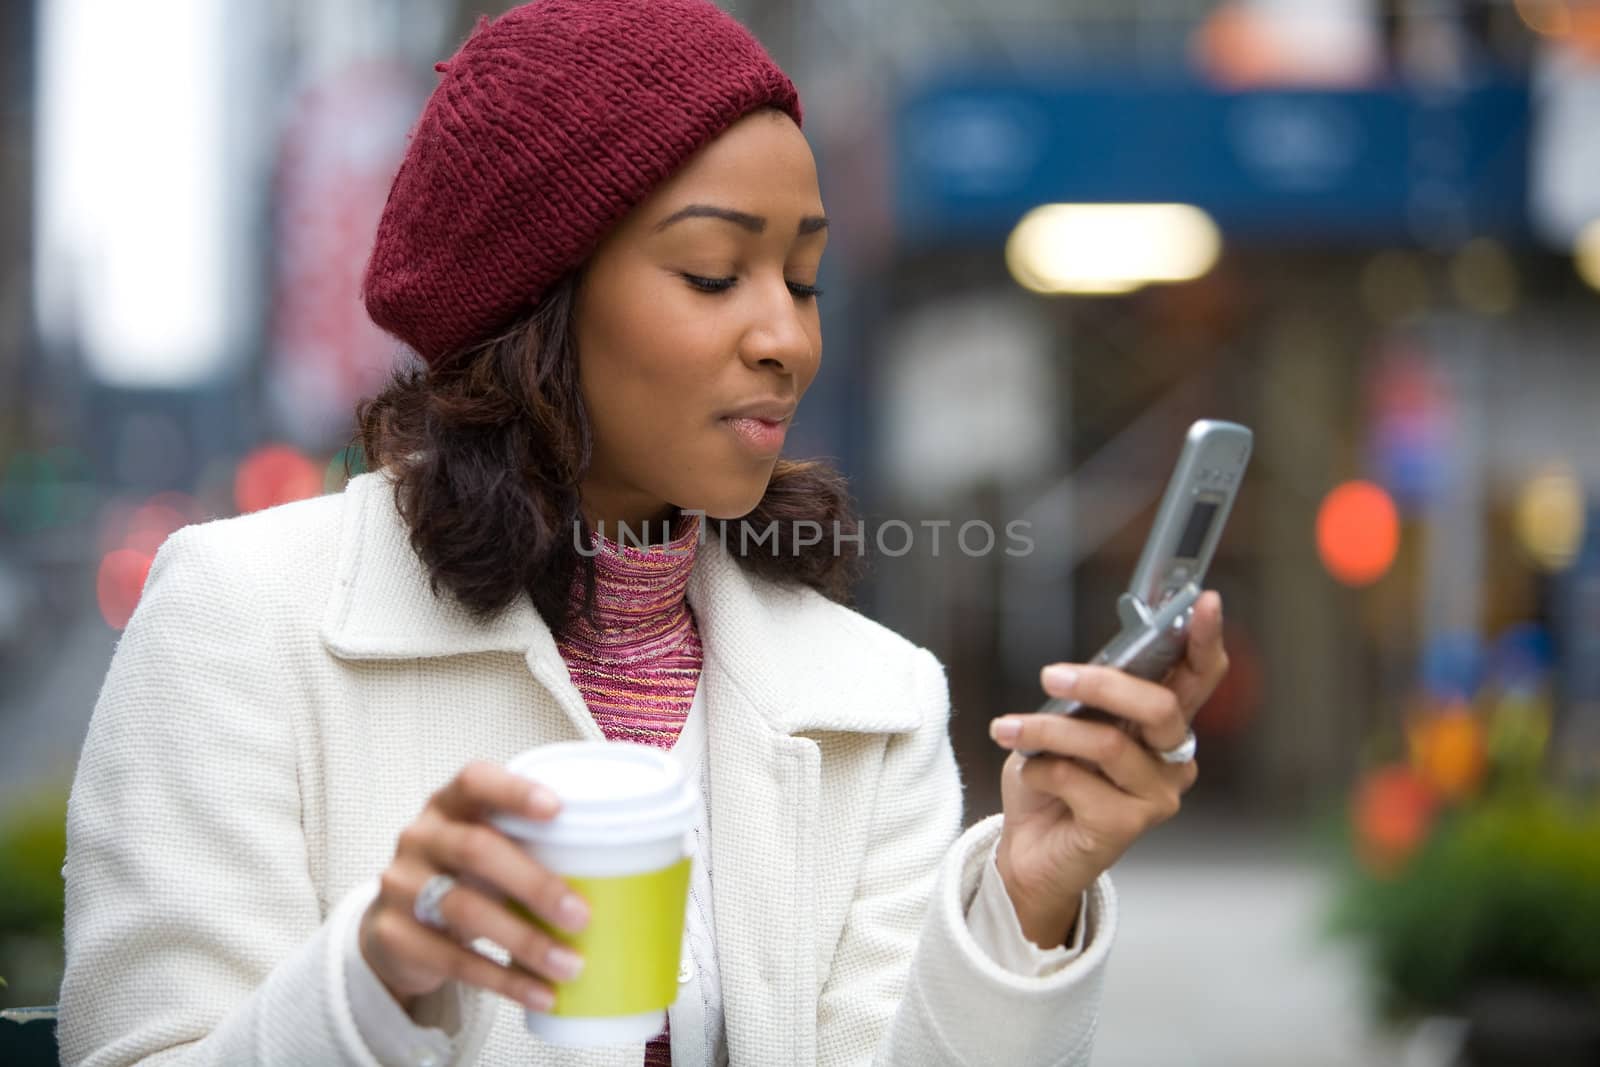 An attractive business woman checking her cell phone in the city.  She could be text messaging or even browsing the web via wi-fi or a 3g connection.